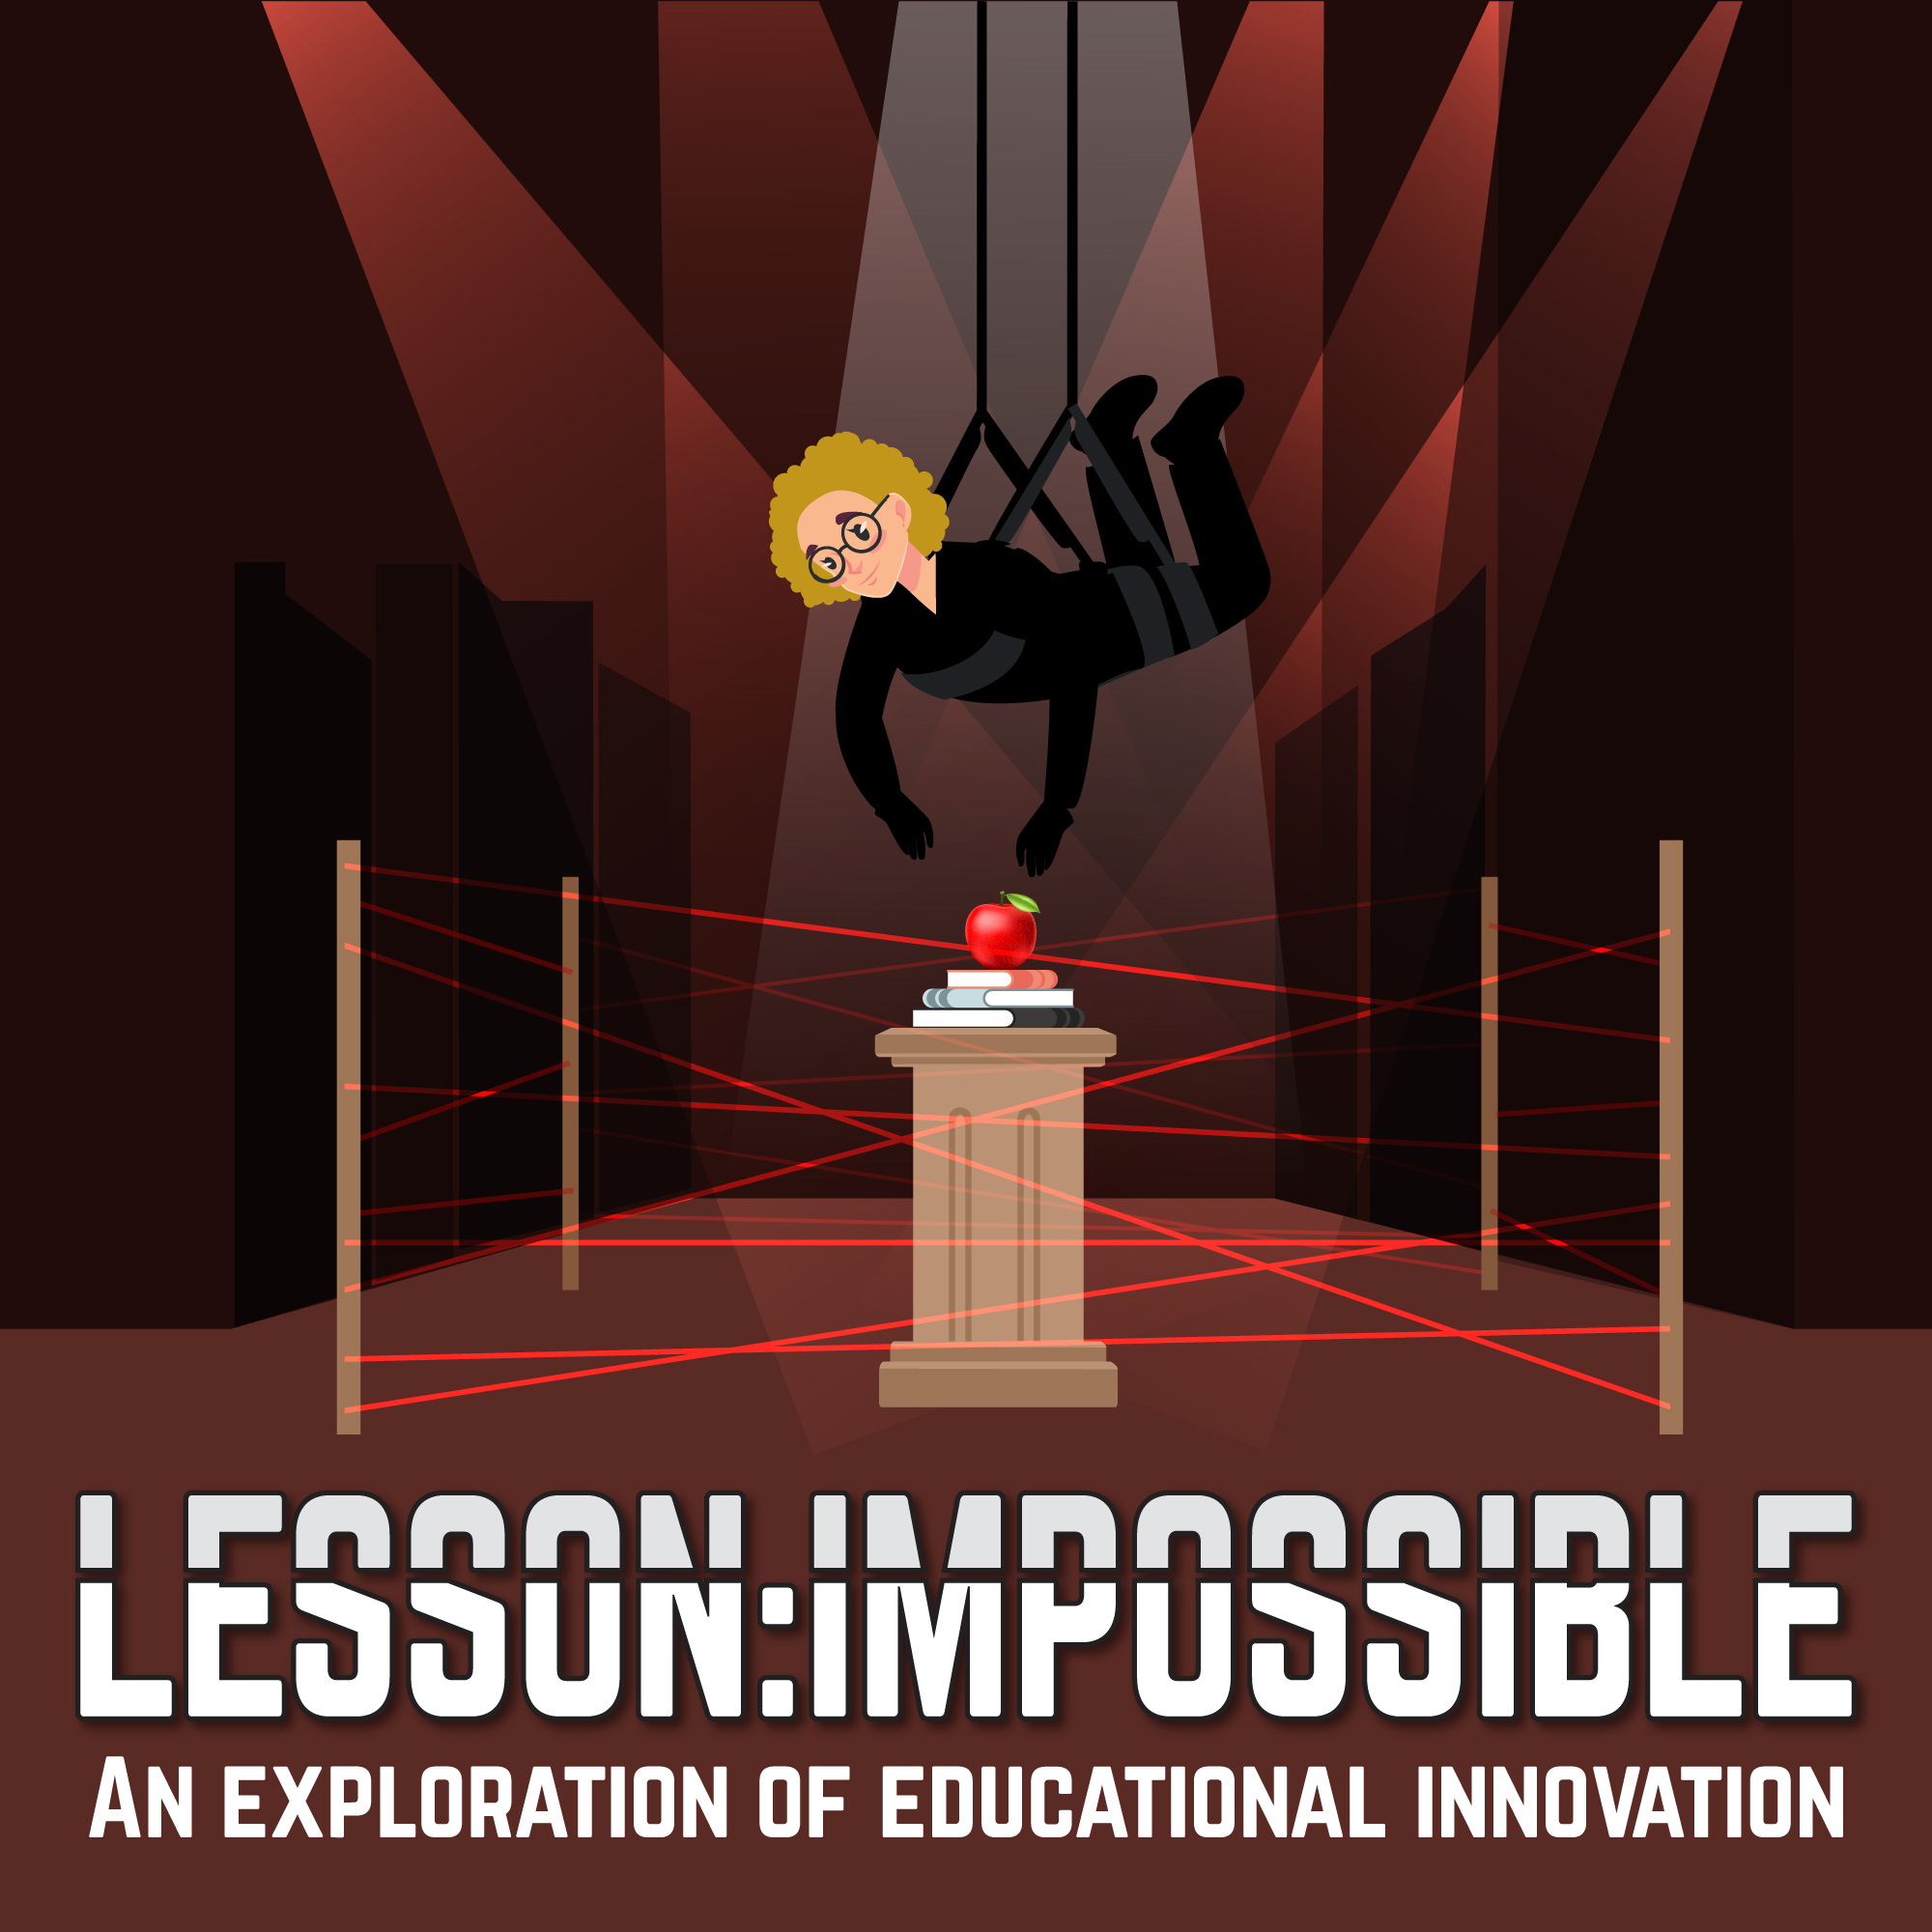 Lesson: Impossible - An Exploration of Educational Innovation